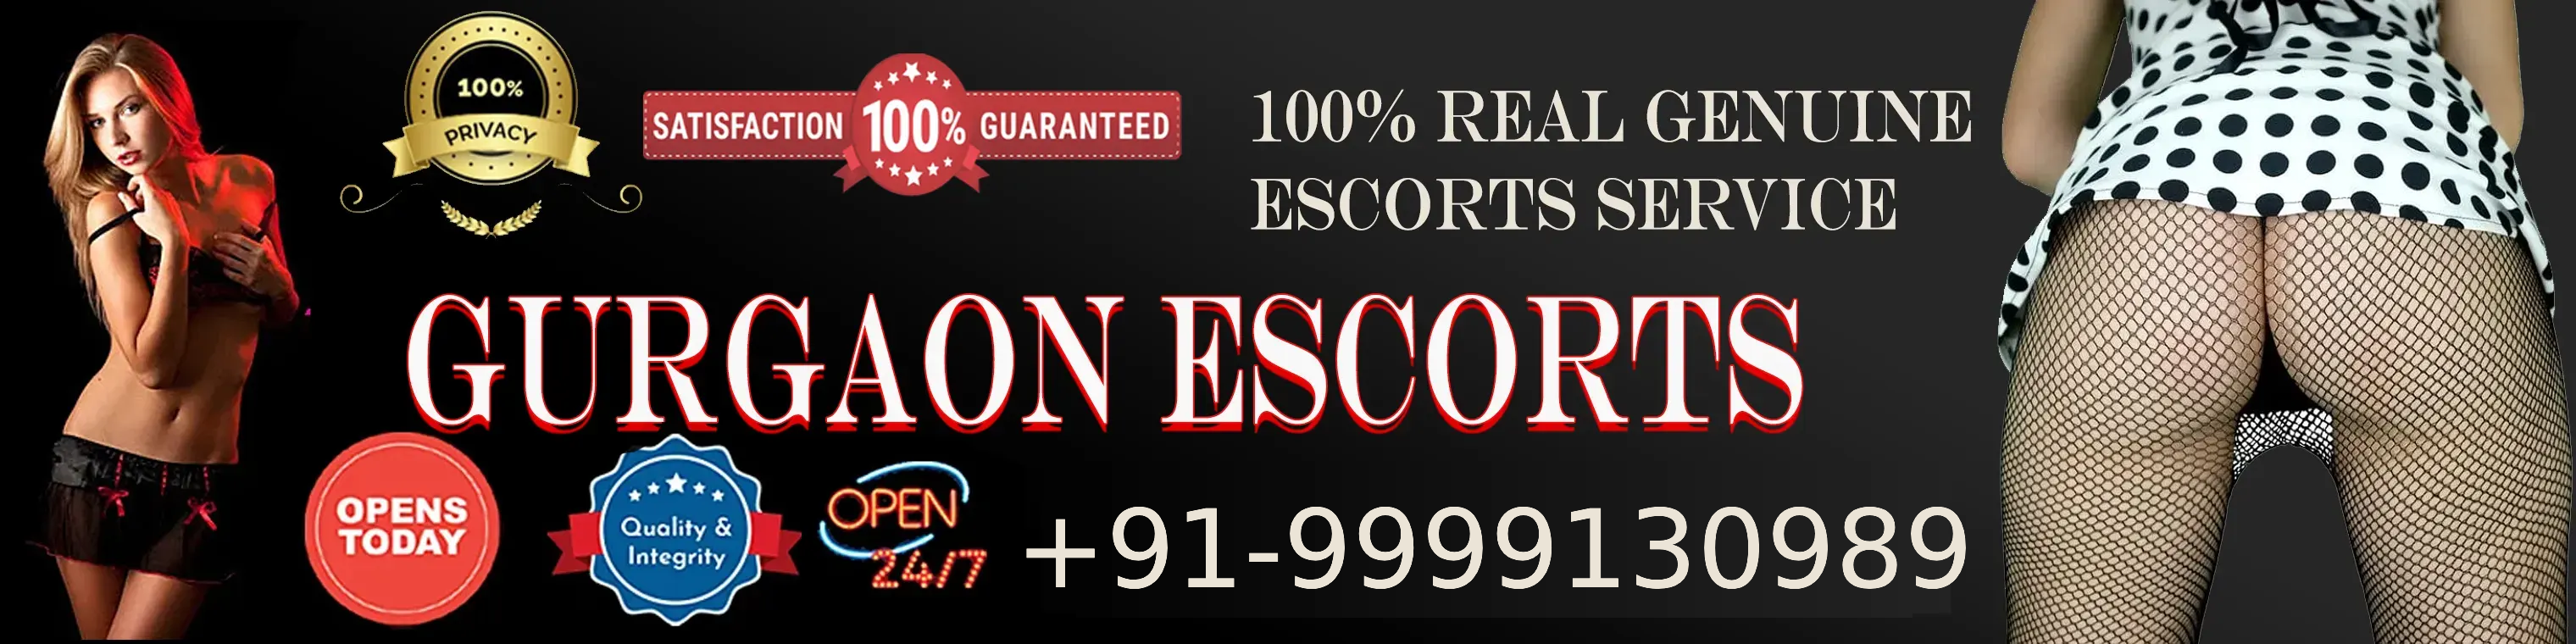 cheap rate escorts in gurgaon escorts prices